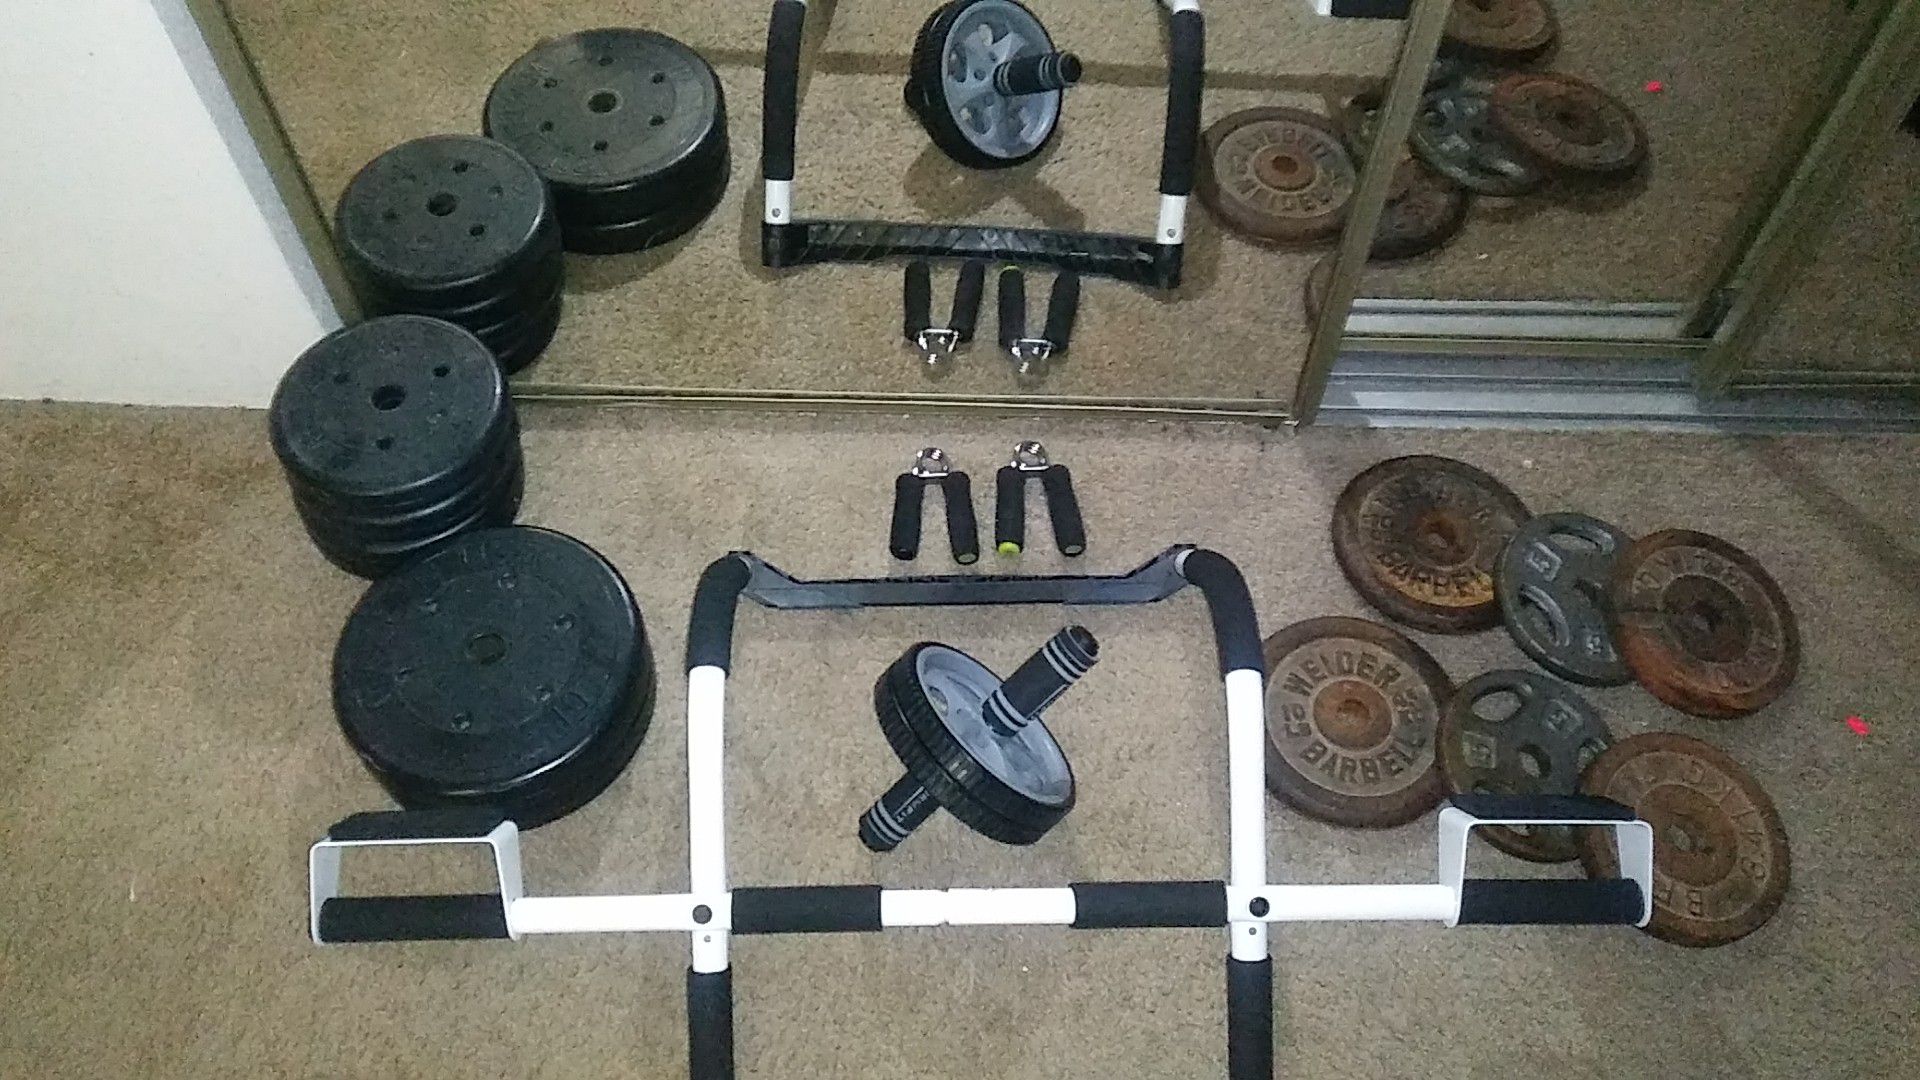 85 pounds of weights and it comes with a curling bar